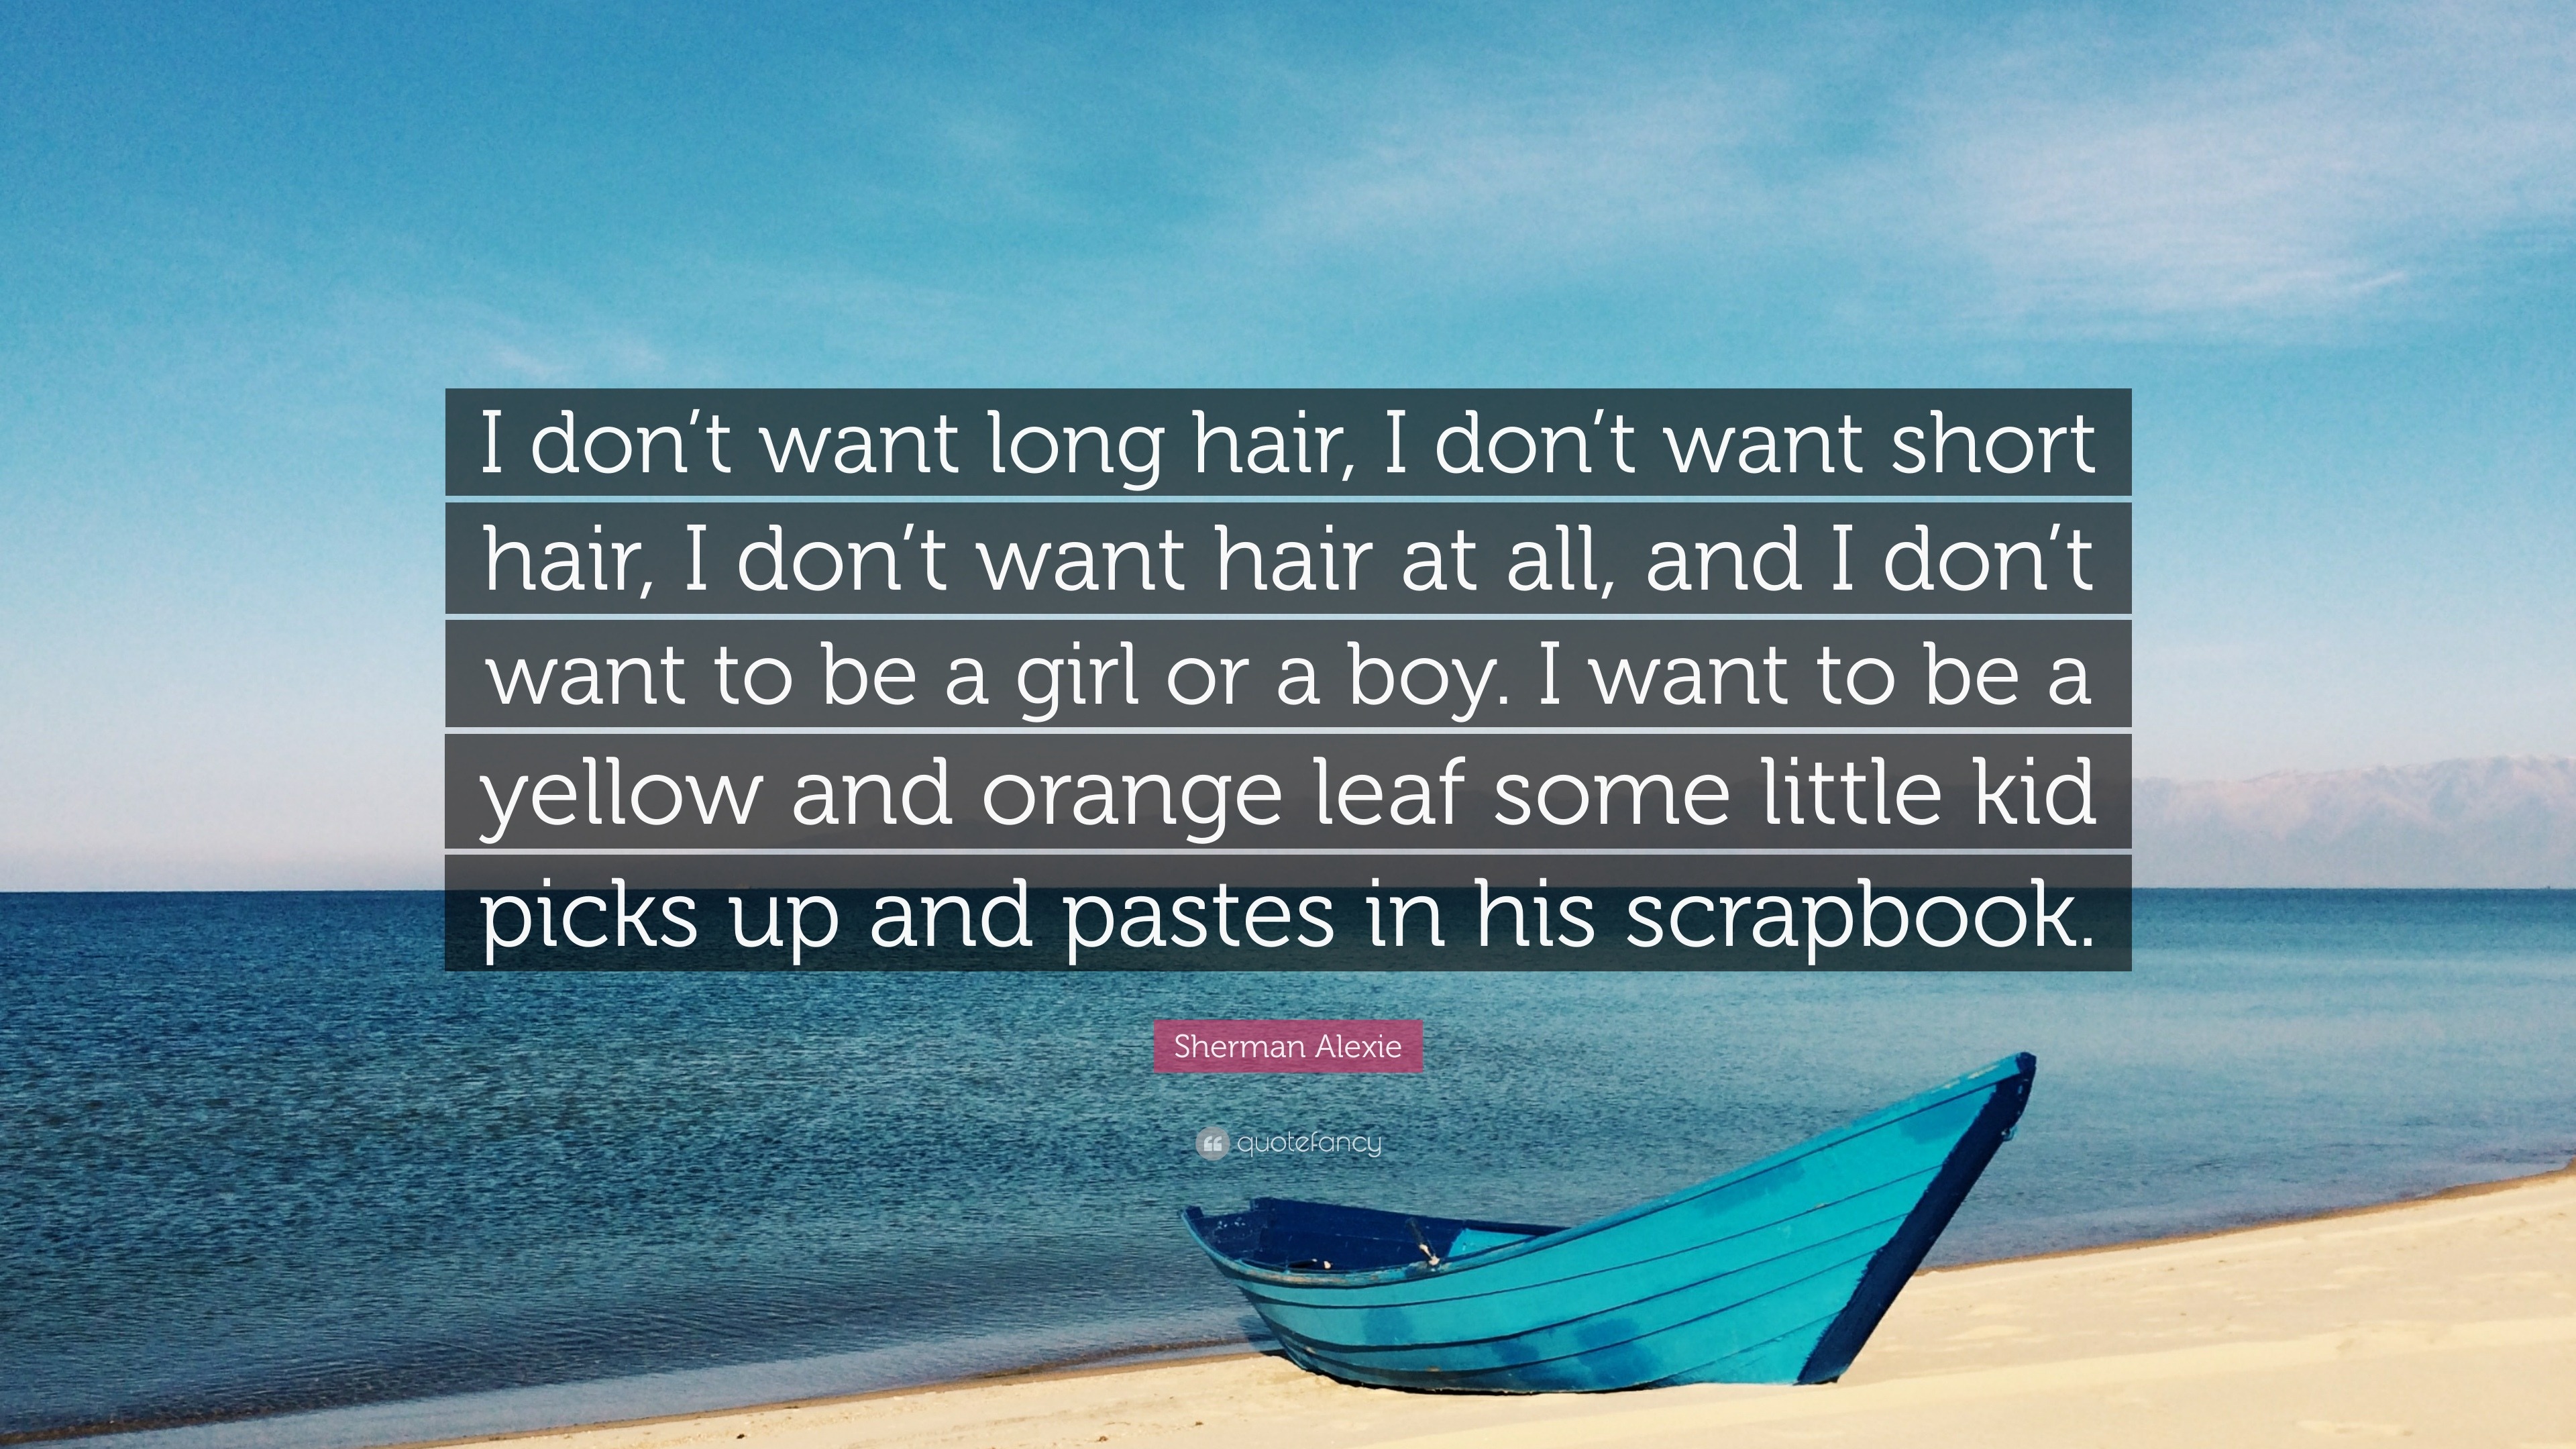 Sherman Alexie Quote: “I don't want long hair, I don't want short hair, I  don't want hair at all, and I don't want to be a girl or a boy. I wan...”